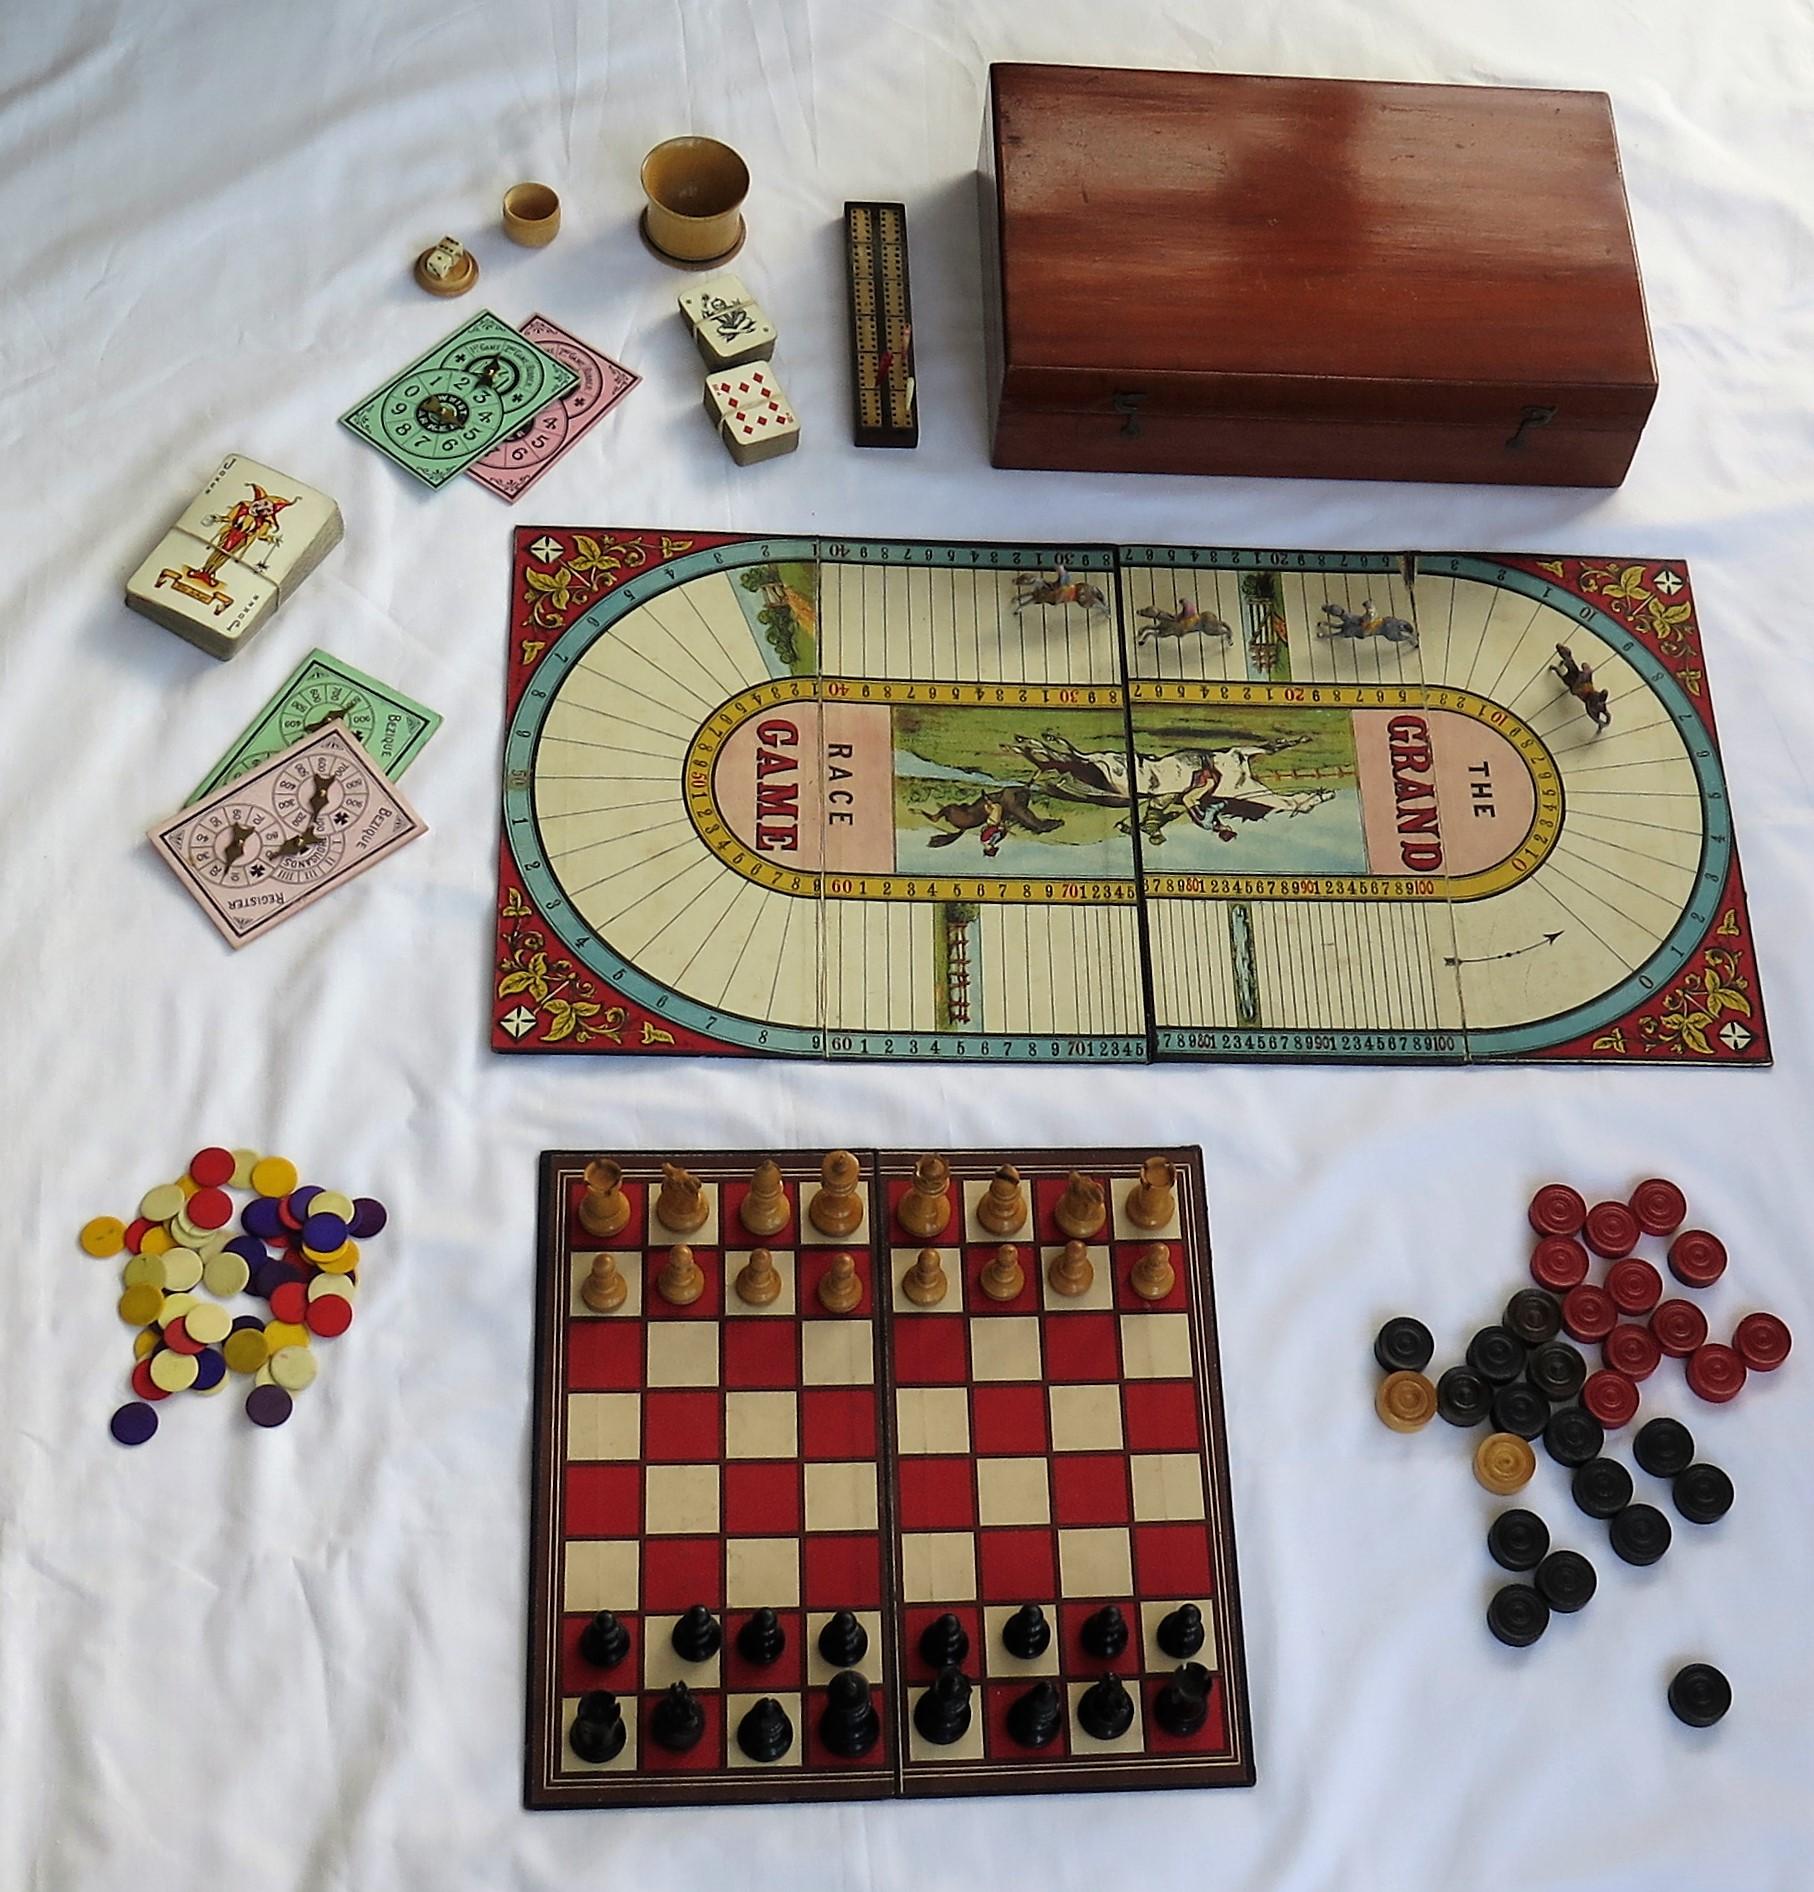 This is a high quality Games Compendium, complete with over 8 individual games, all in its original hardwood storage box with a hinged lid.

All the pieces are well made and complete.

The box is made of a jointed hardwood, possibly red walnut and